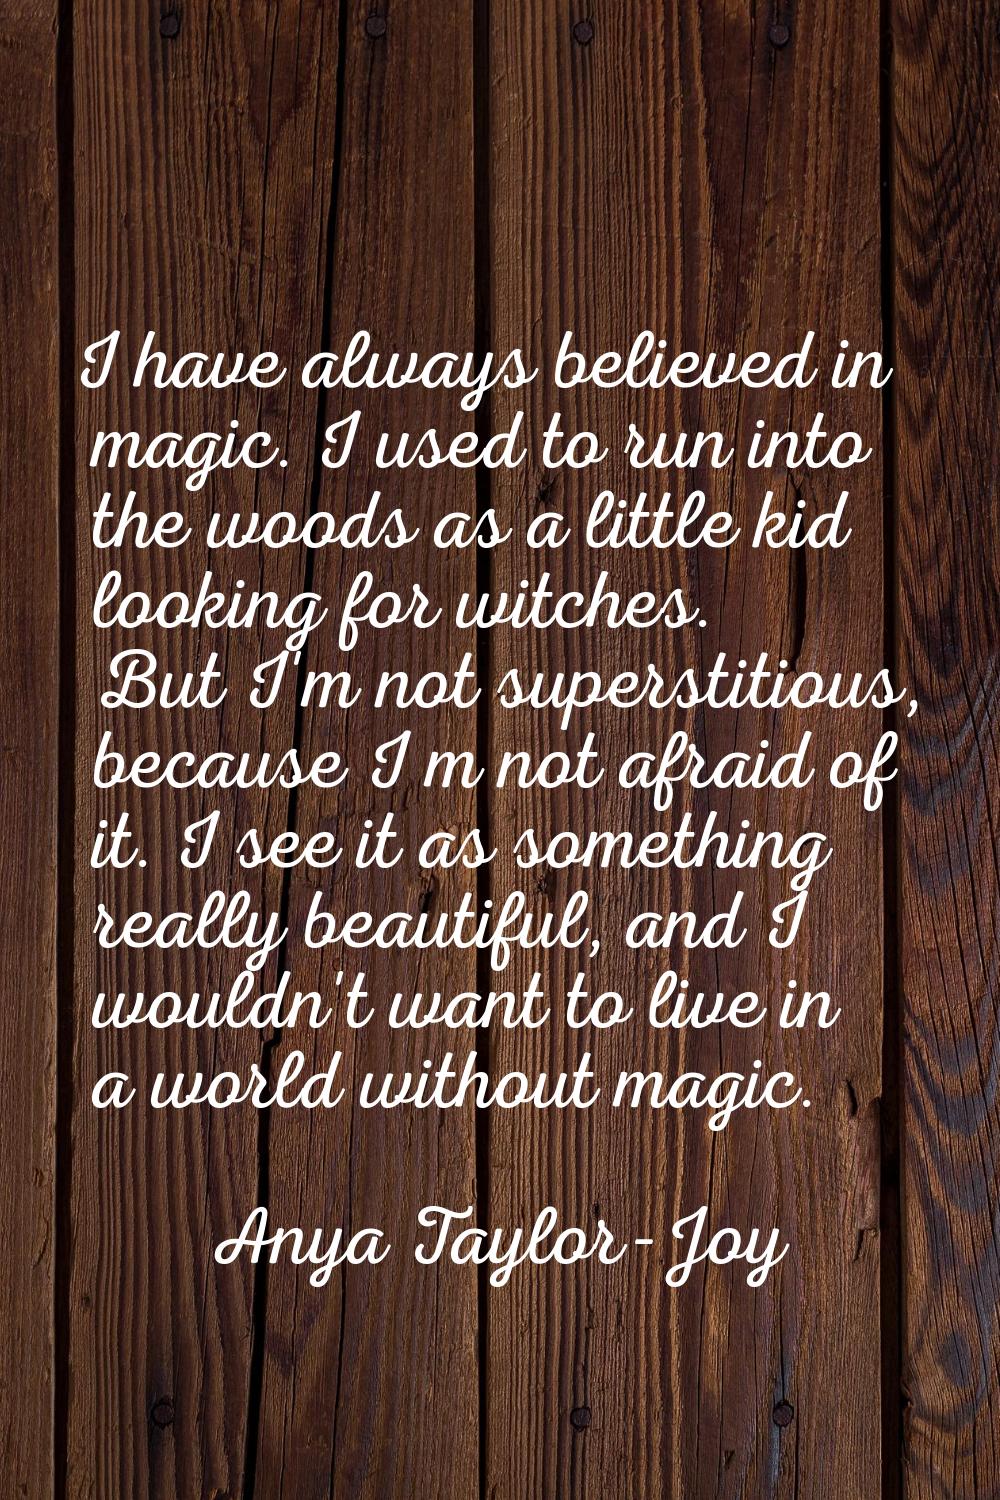 I have always believed in magic. I used to run into the woods as a little kid looking for witches. 